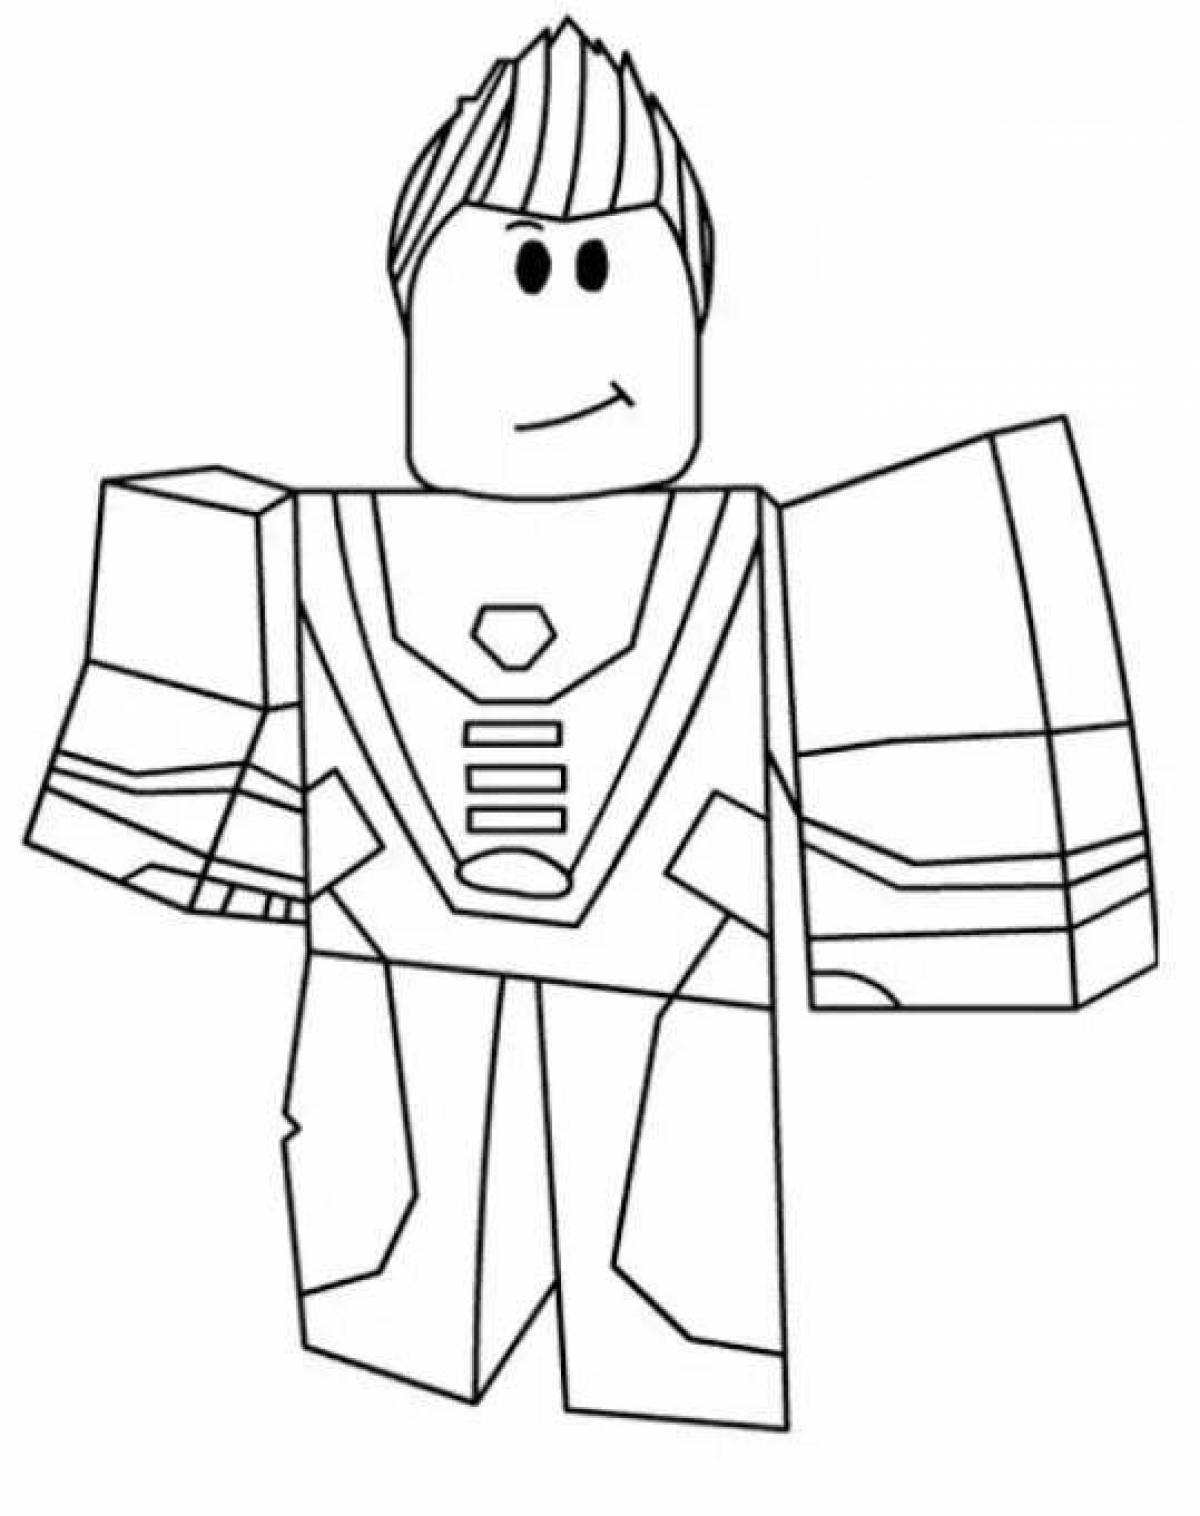 Roblox skins creative coloring page